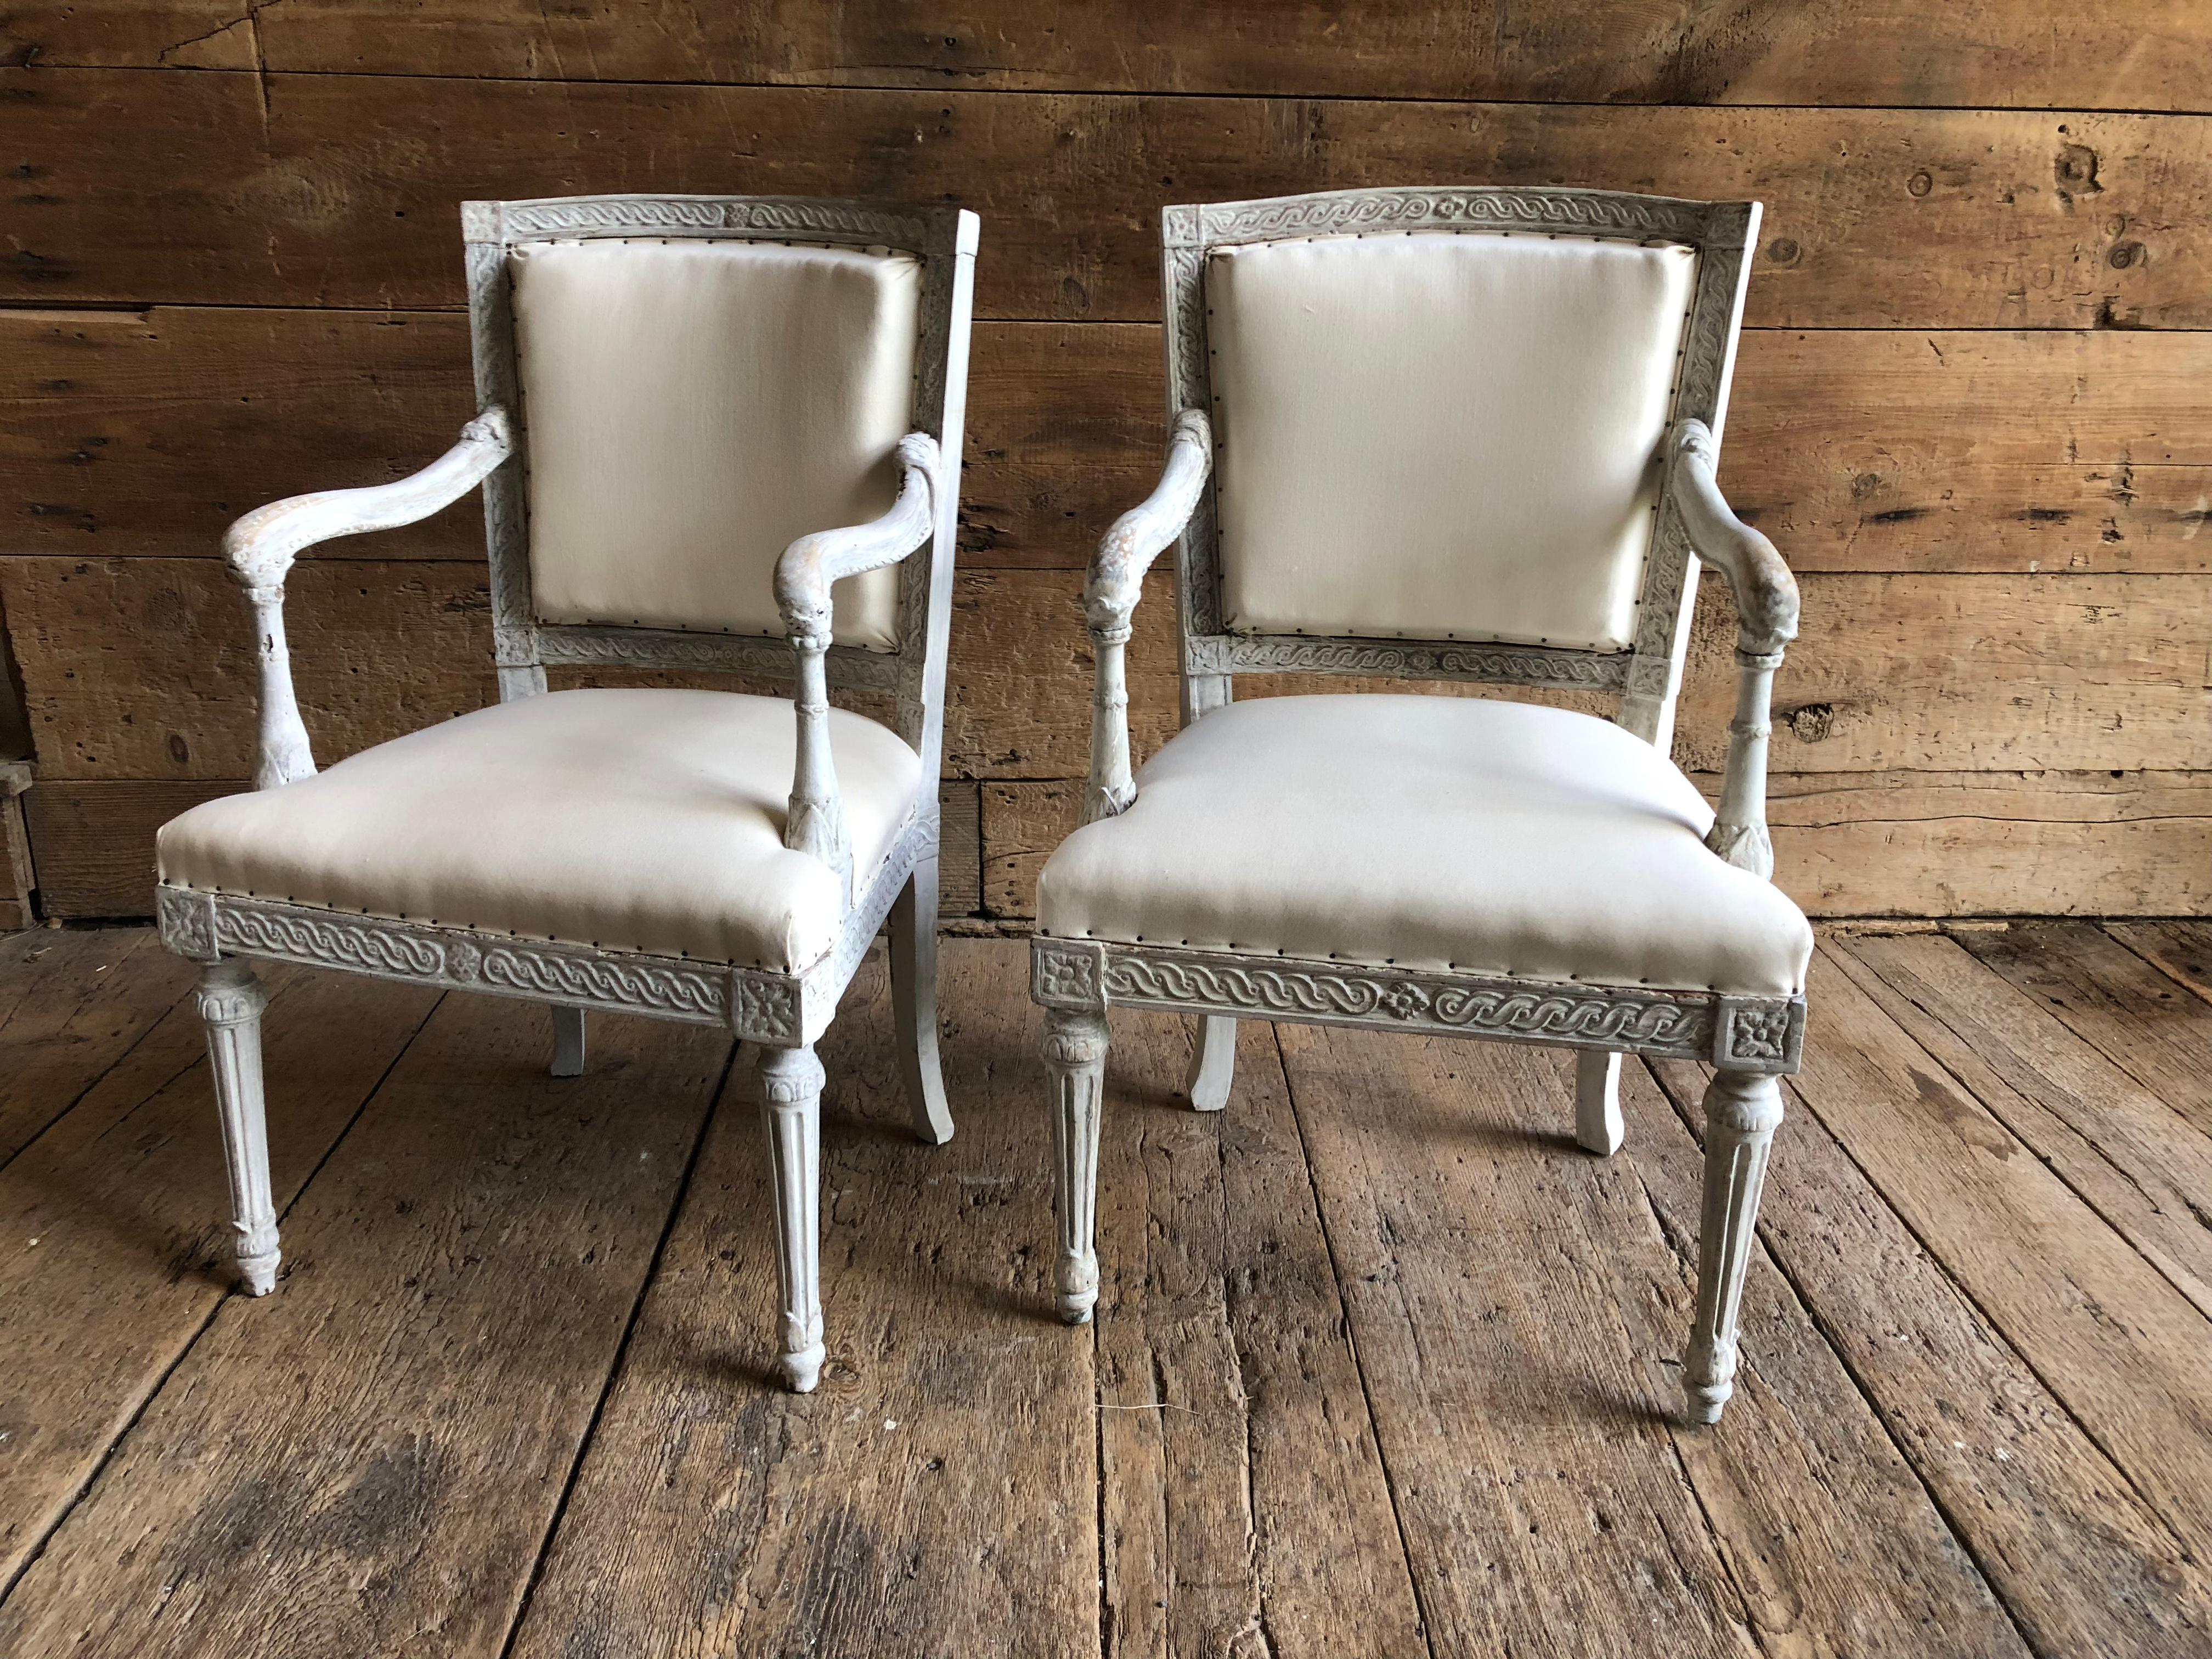 A pair of Italian neoclassic upholstered armchairs in white/grey painted finish, elaborately carved back and seat rails with fluted trumpet-form legs and scrolled arms, circa 1780. Upholstered in cream muslin.